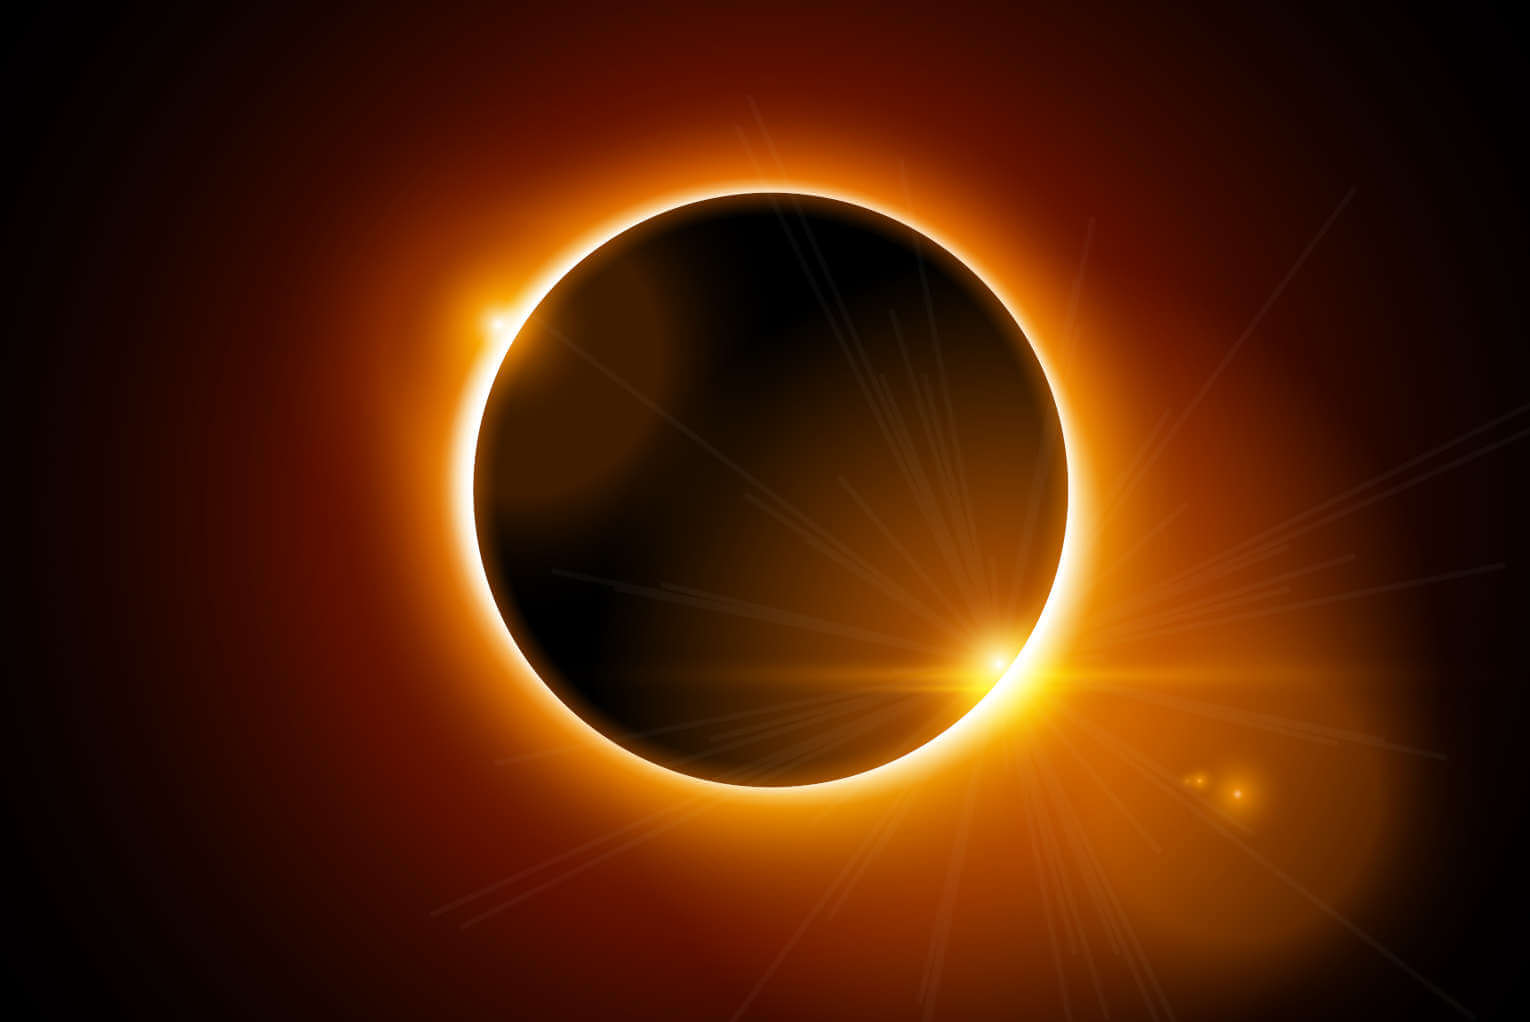 Decoding Heaven’s Message: Spiritual Meanings of the 2024 Great American Eclipse